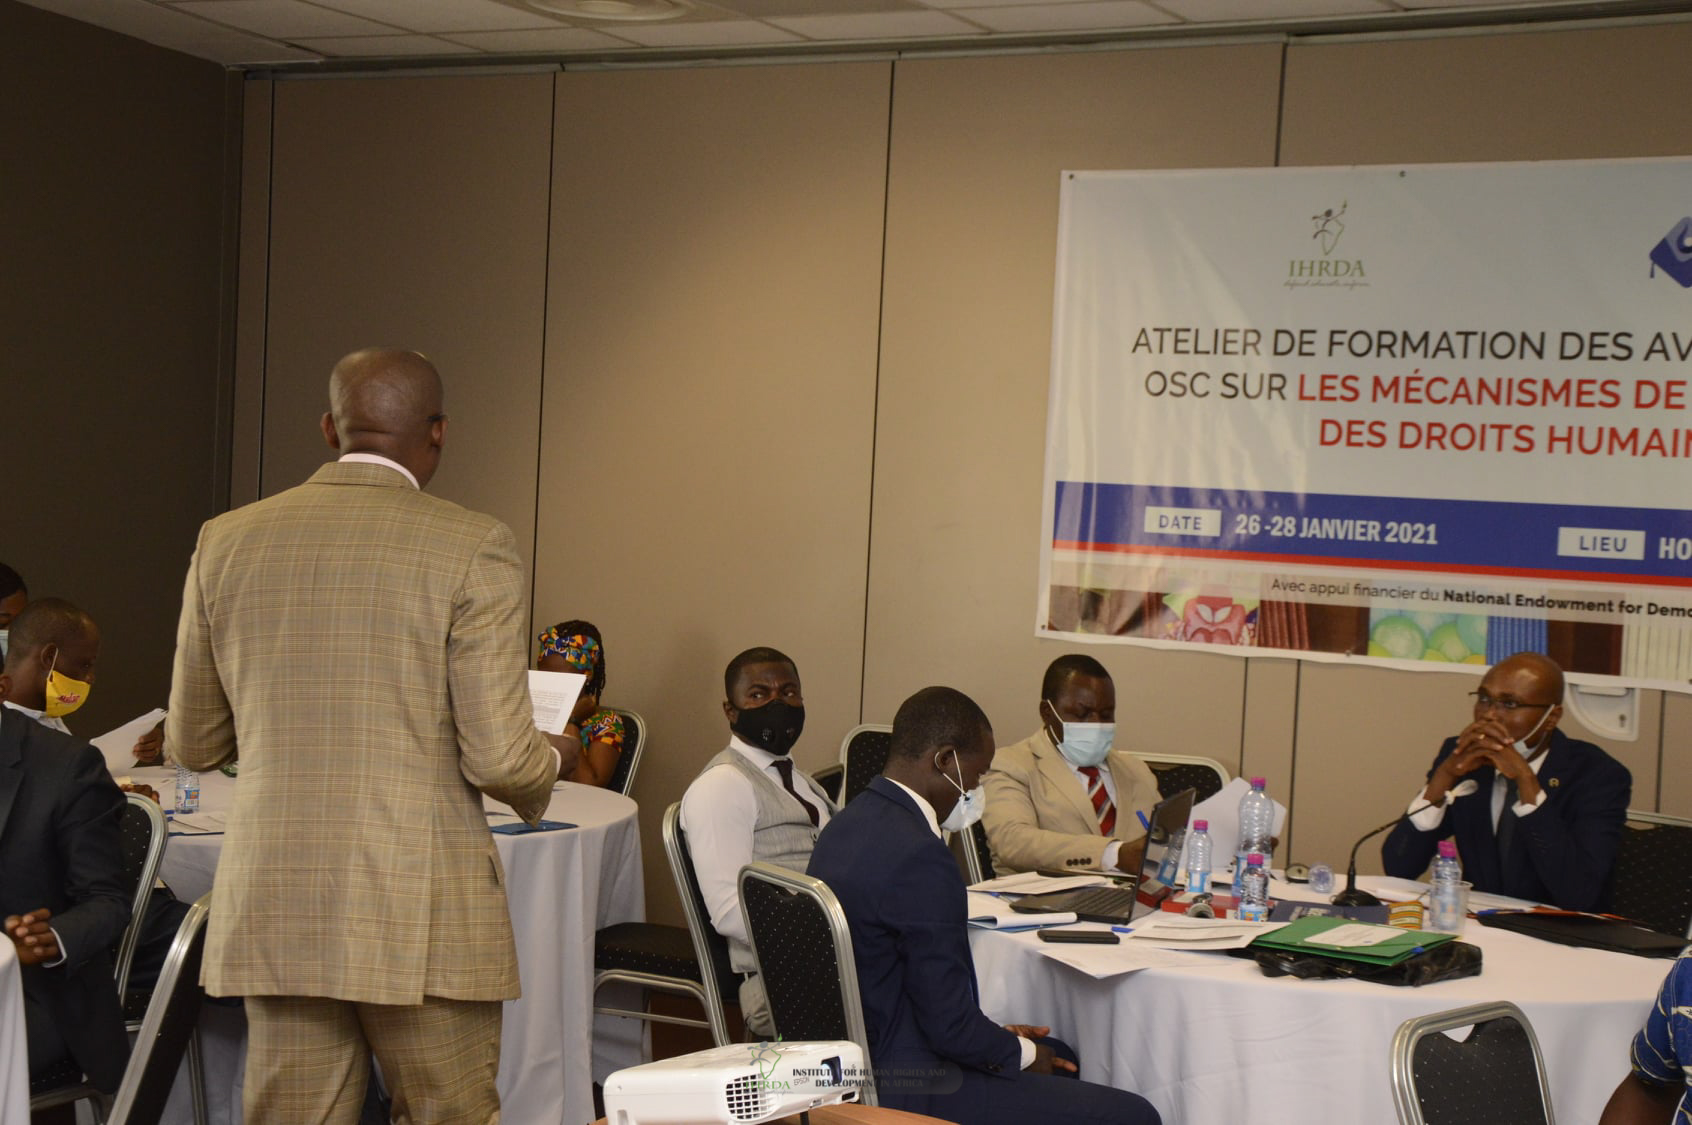 IHRDA and Centre de documentation et de formation sur les droits de l’homme (CDFDH) are organising a human rights strategic litigation training and case-identification workshop with about 25 lawyers and CSOs in Lome, Togo, 26-28 Jan 2021. Activity funded by NED.